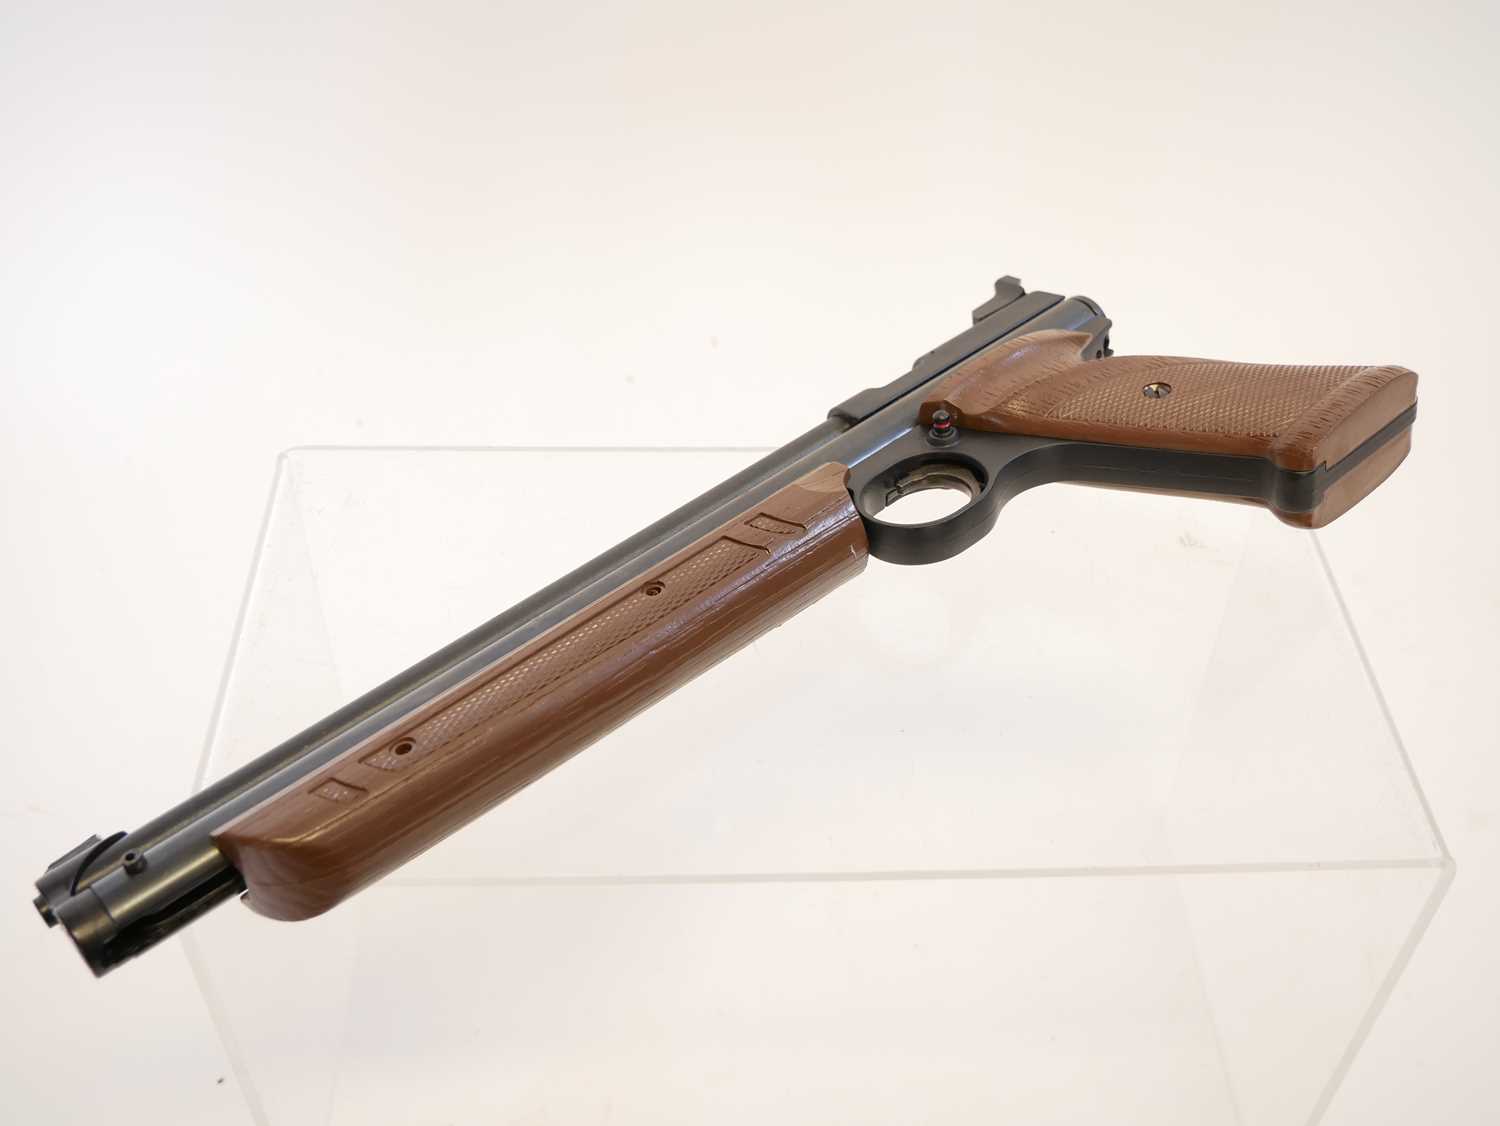 Crosman .177 model 1377 American Classic air pistol, serial number 314B03081. No licence required to - Image 5 of 7